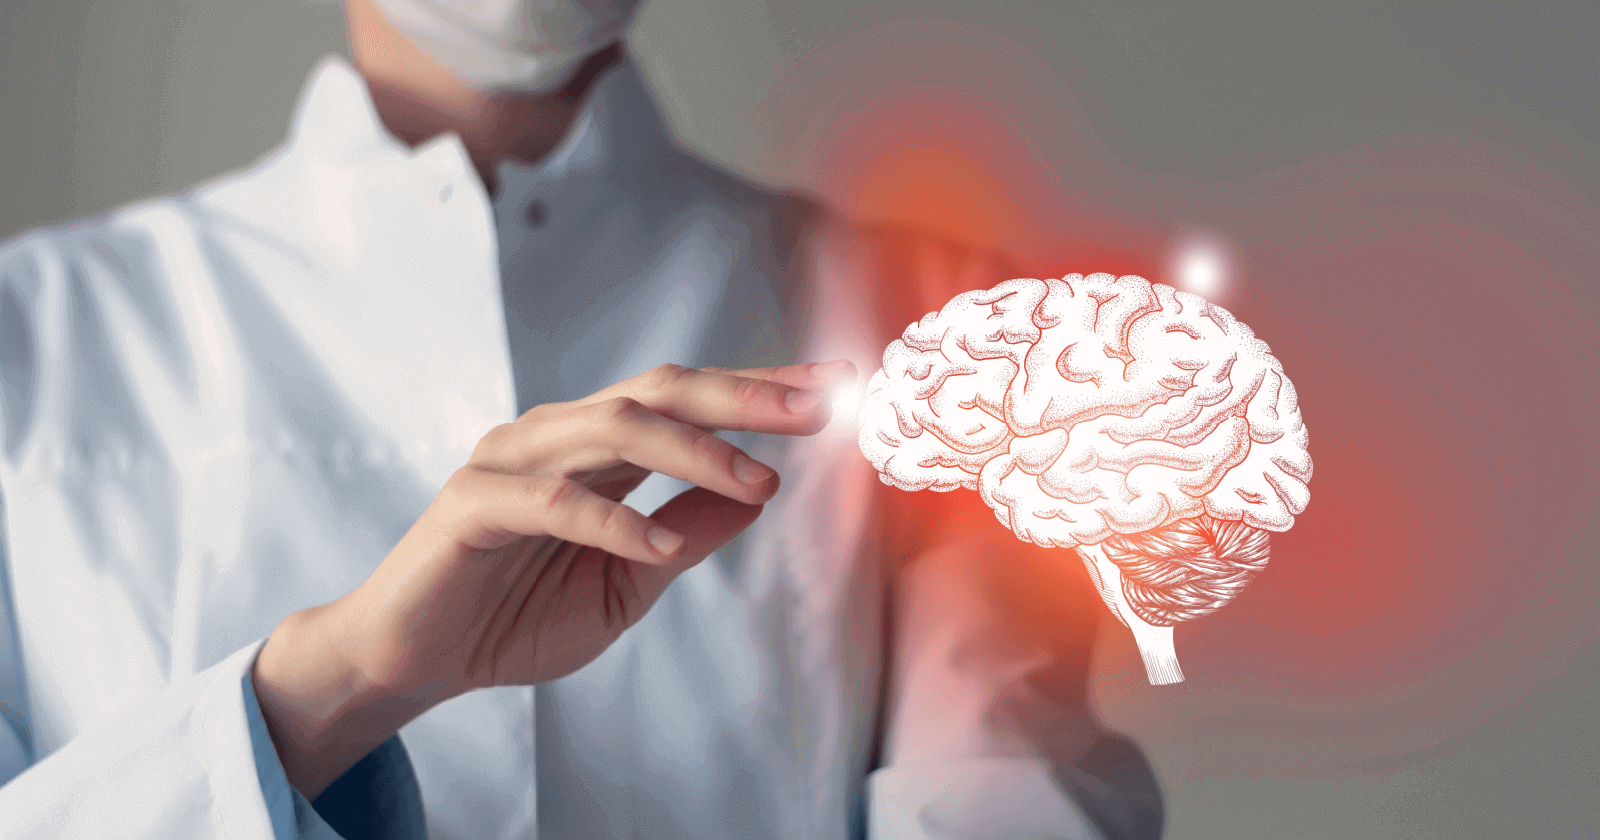 Overview of Brain Lesions: Meaning, symptoms, causes & Treatment